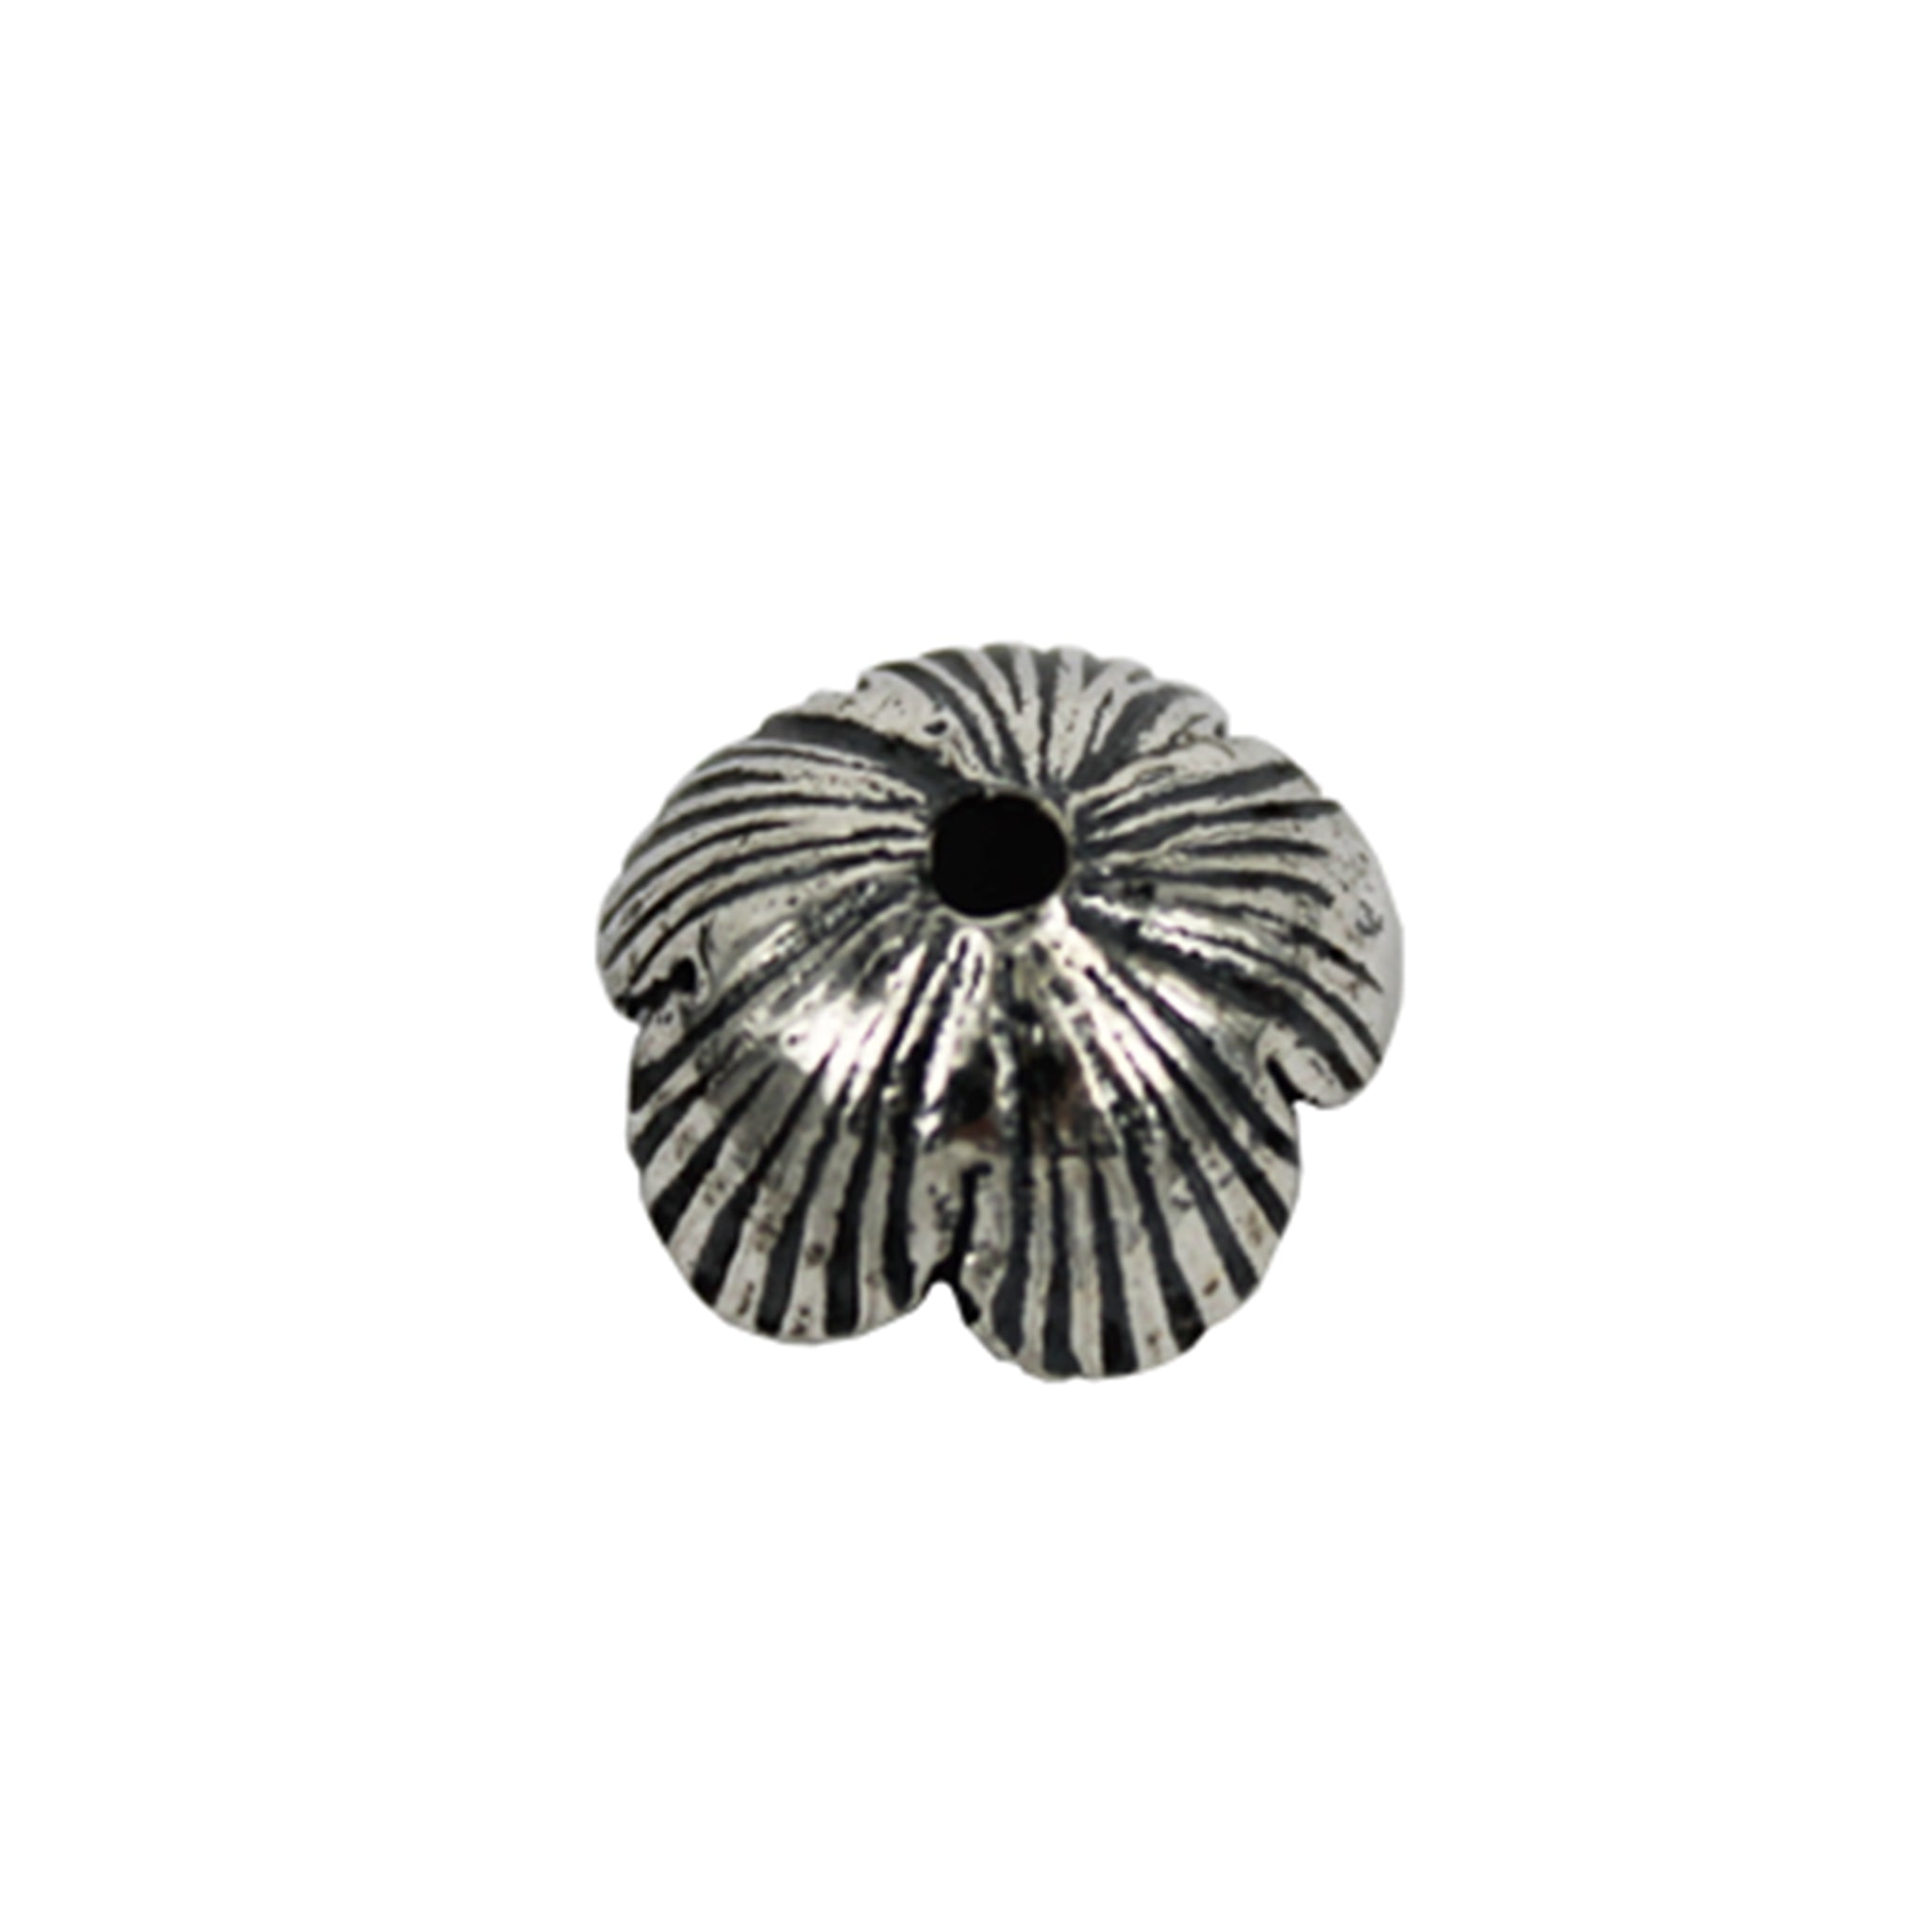 Stripes Bead Cap in Antique Sterling Silver 10.3mm